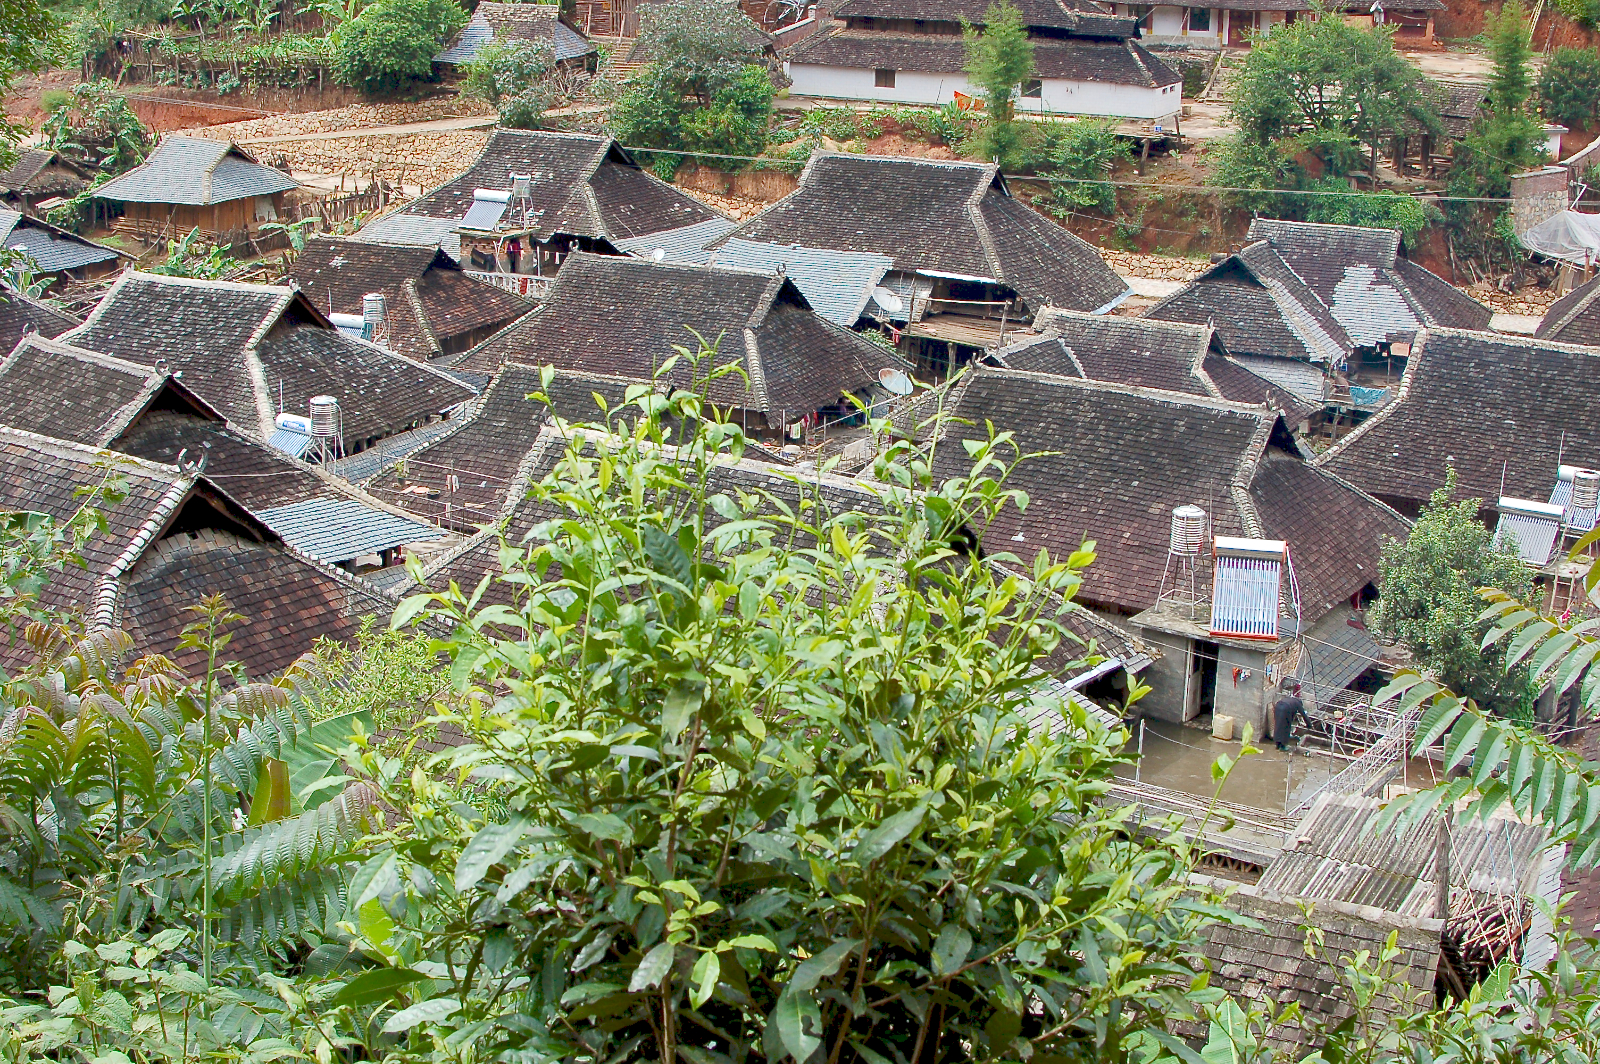 A tea tree overlooking the peaked roofs of a village in Jingmai.